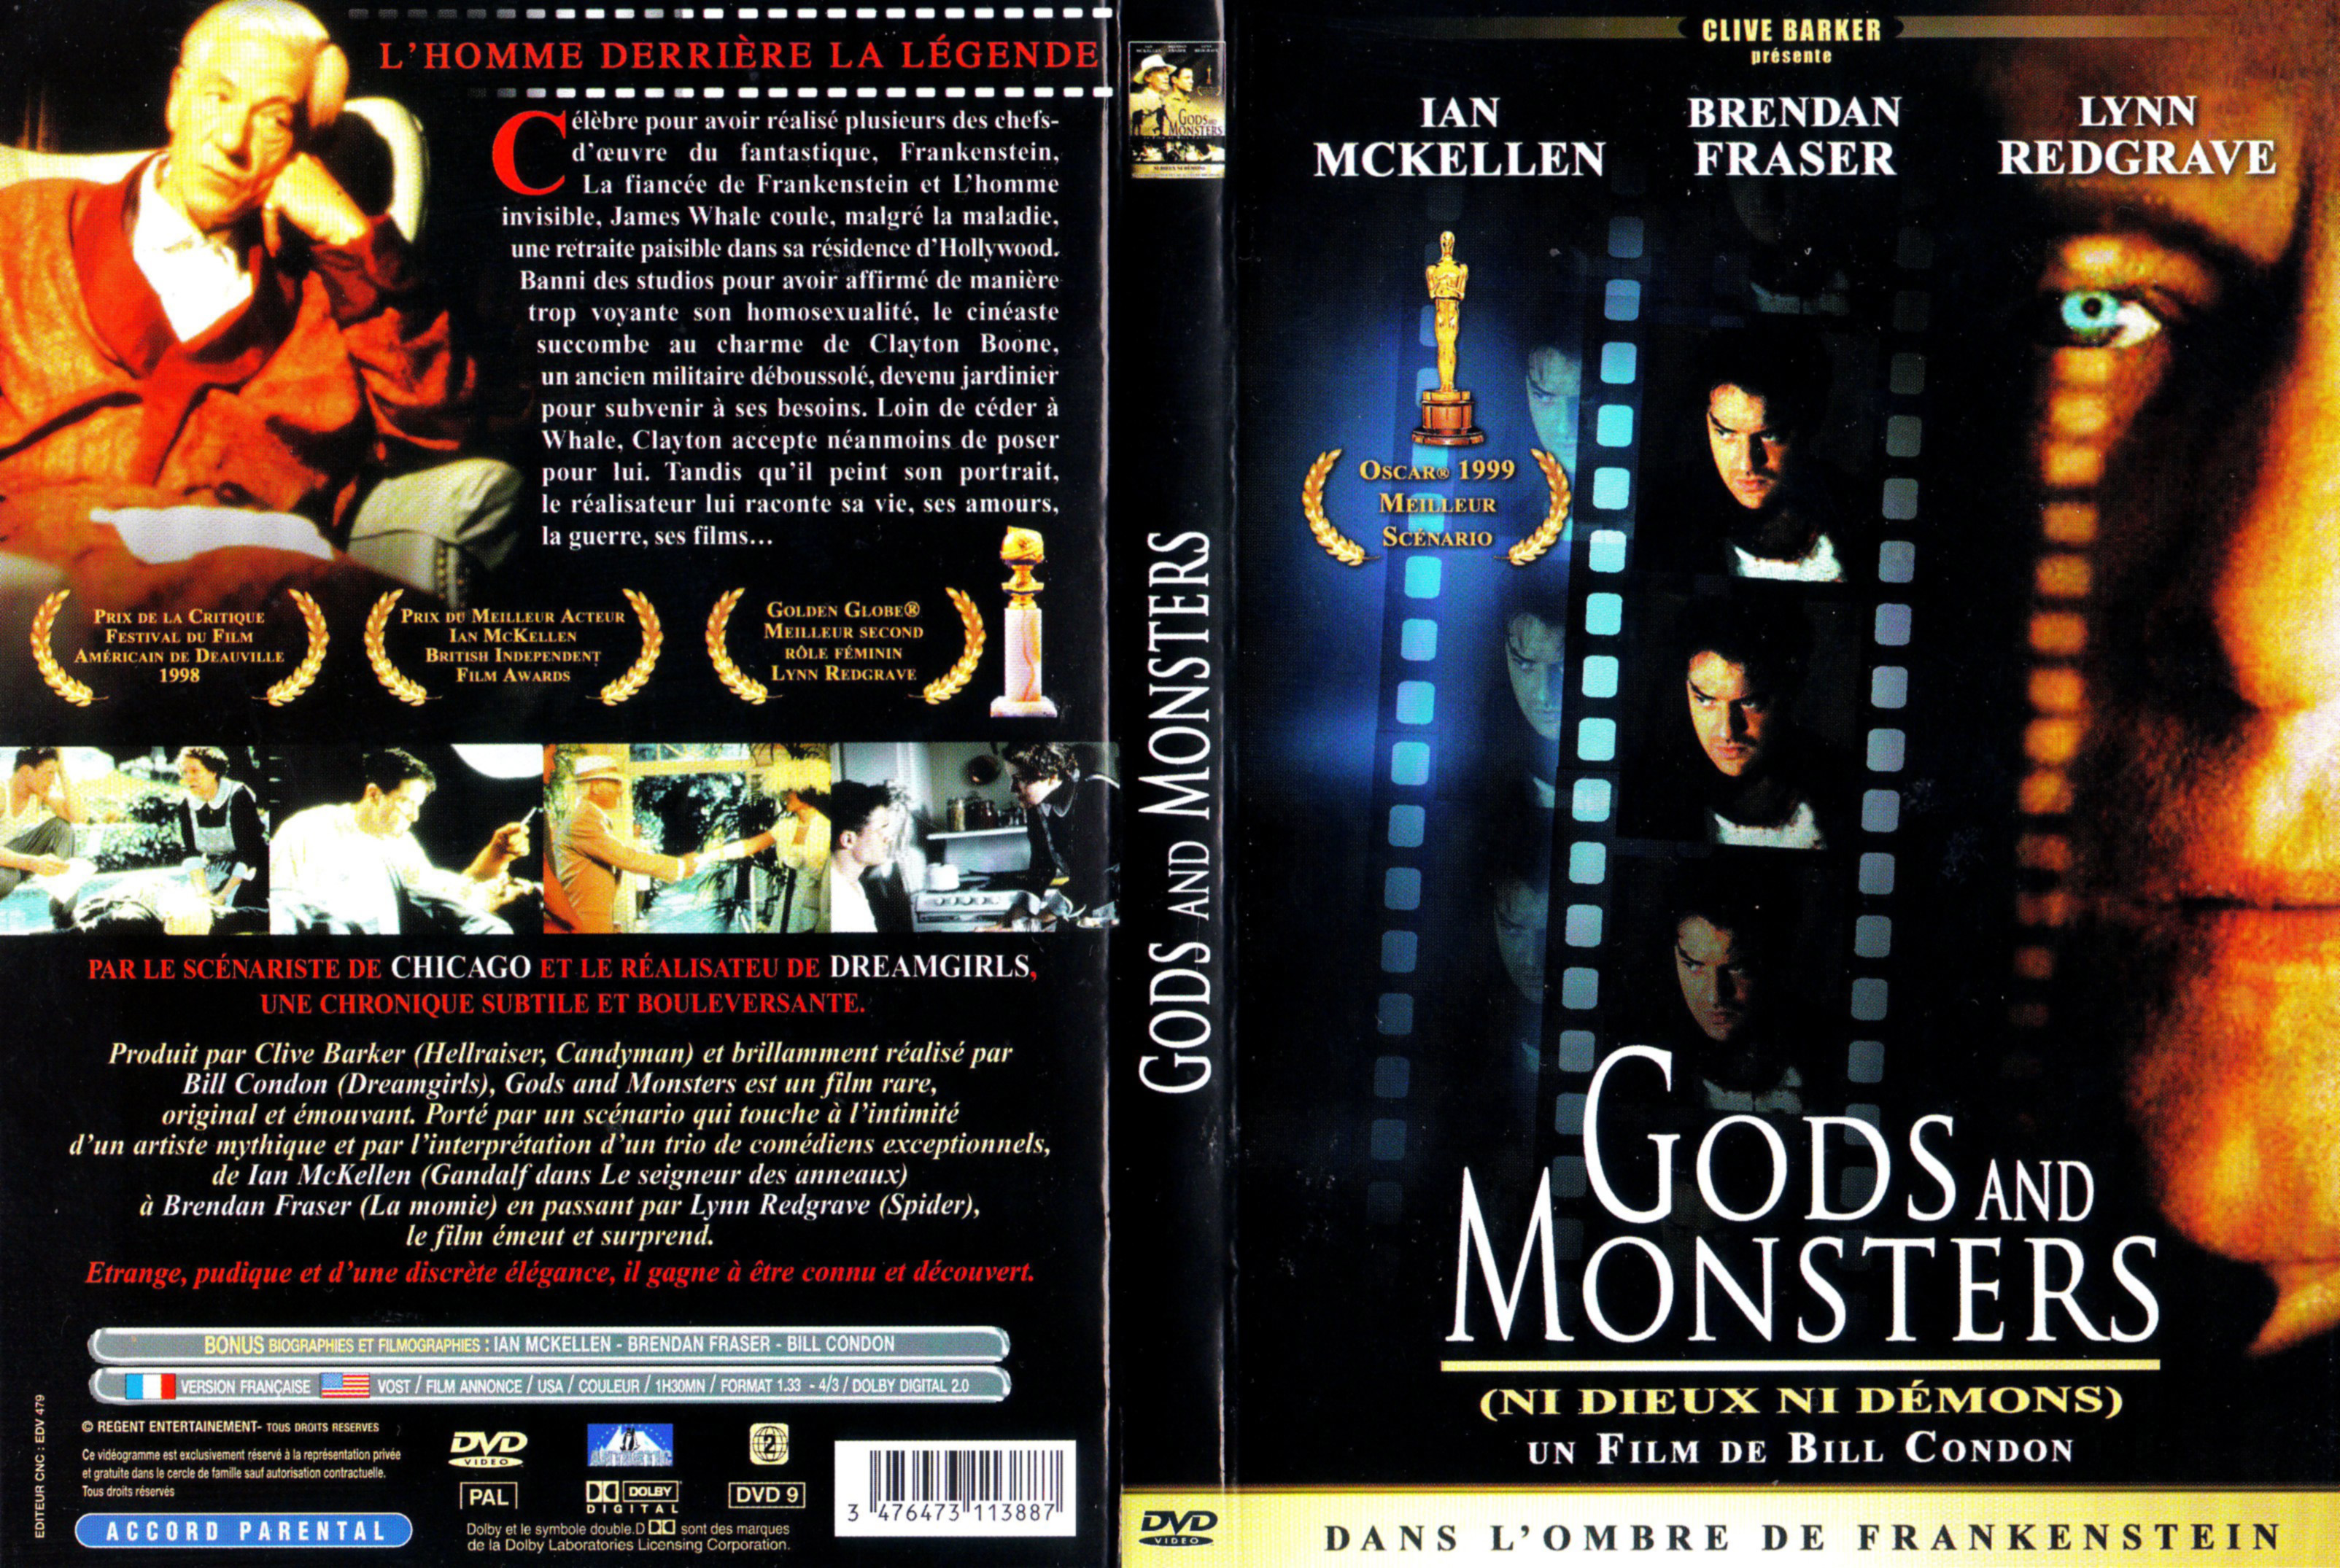 Jaquette DVD Ni Dieux Ni Dmons - Gods and Monsters